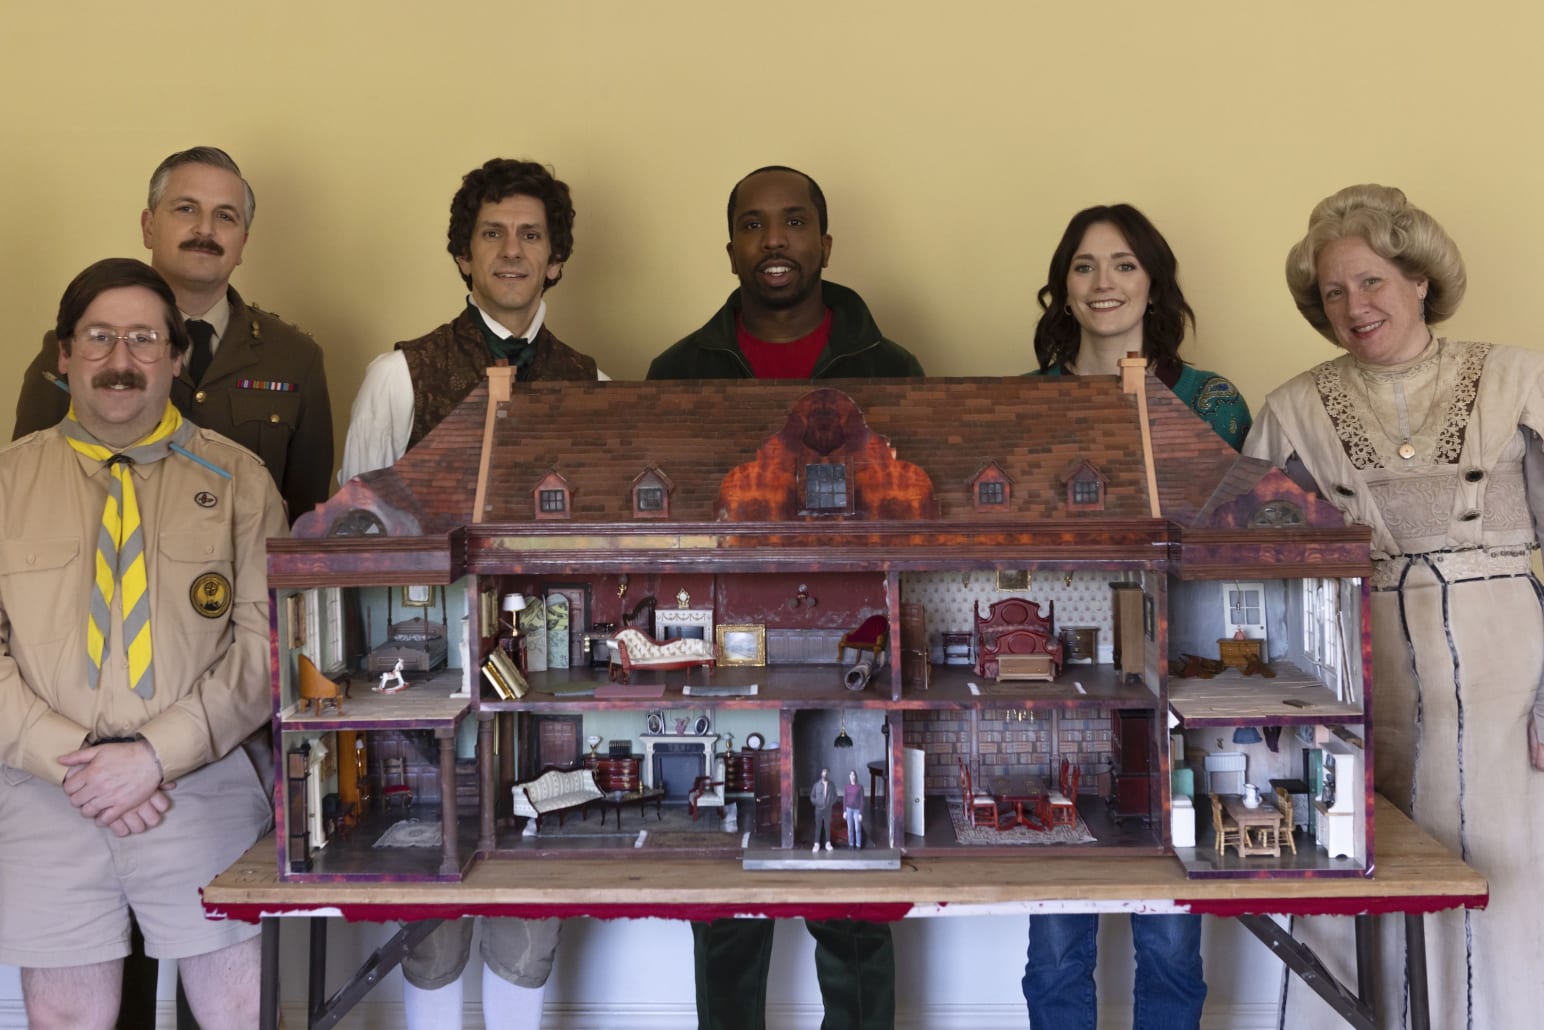 The cast of Ghosts with the dolls house